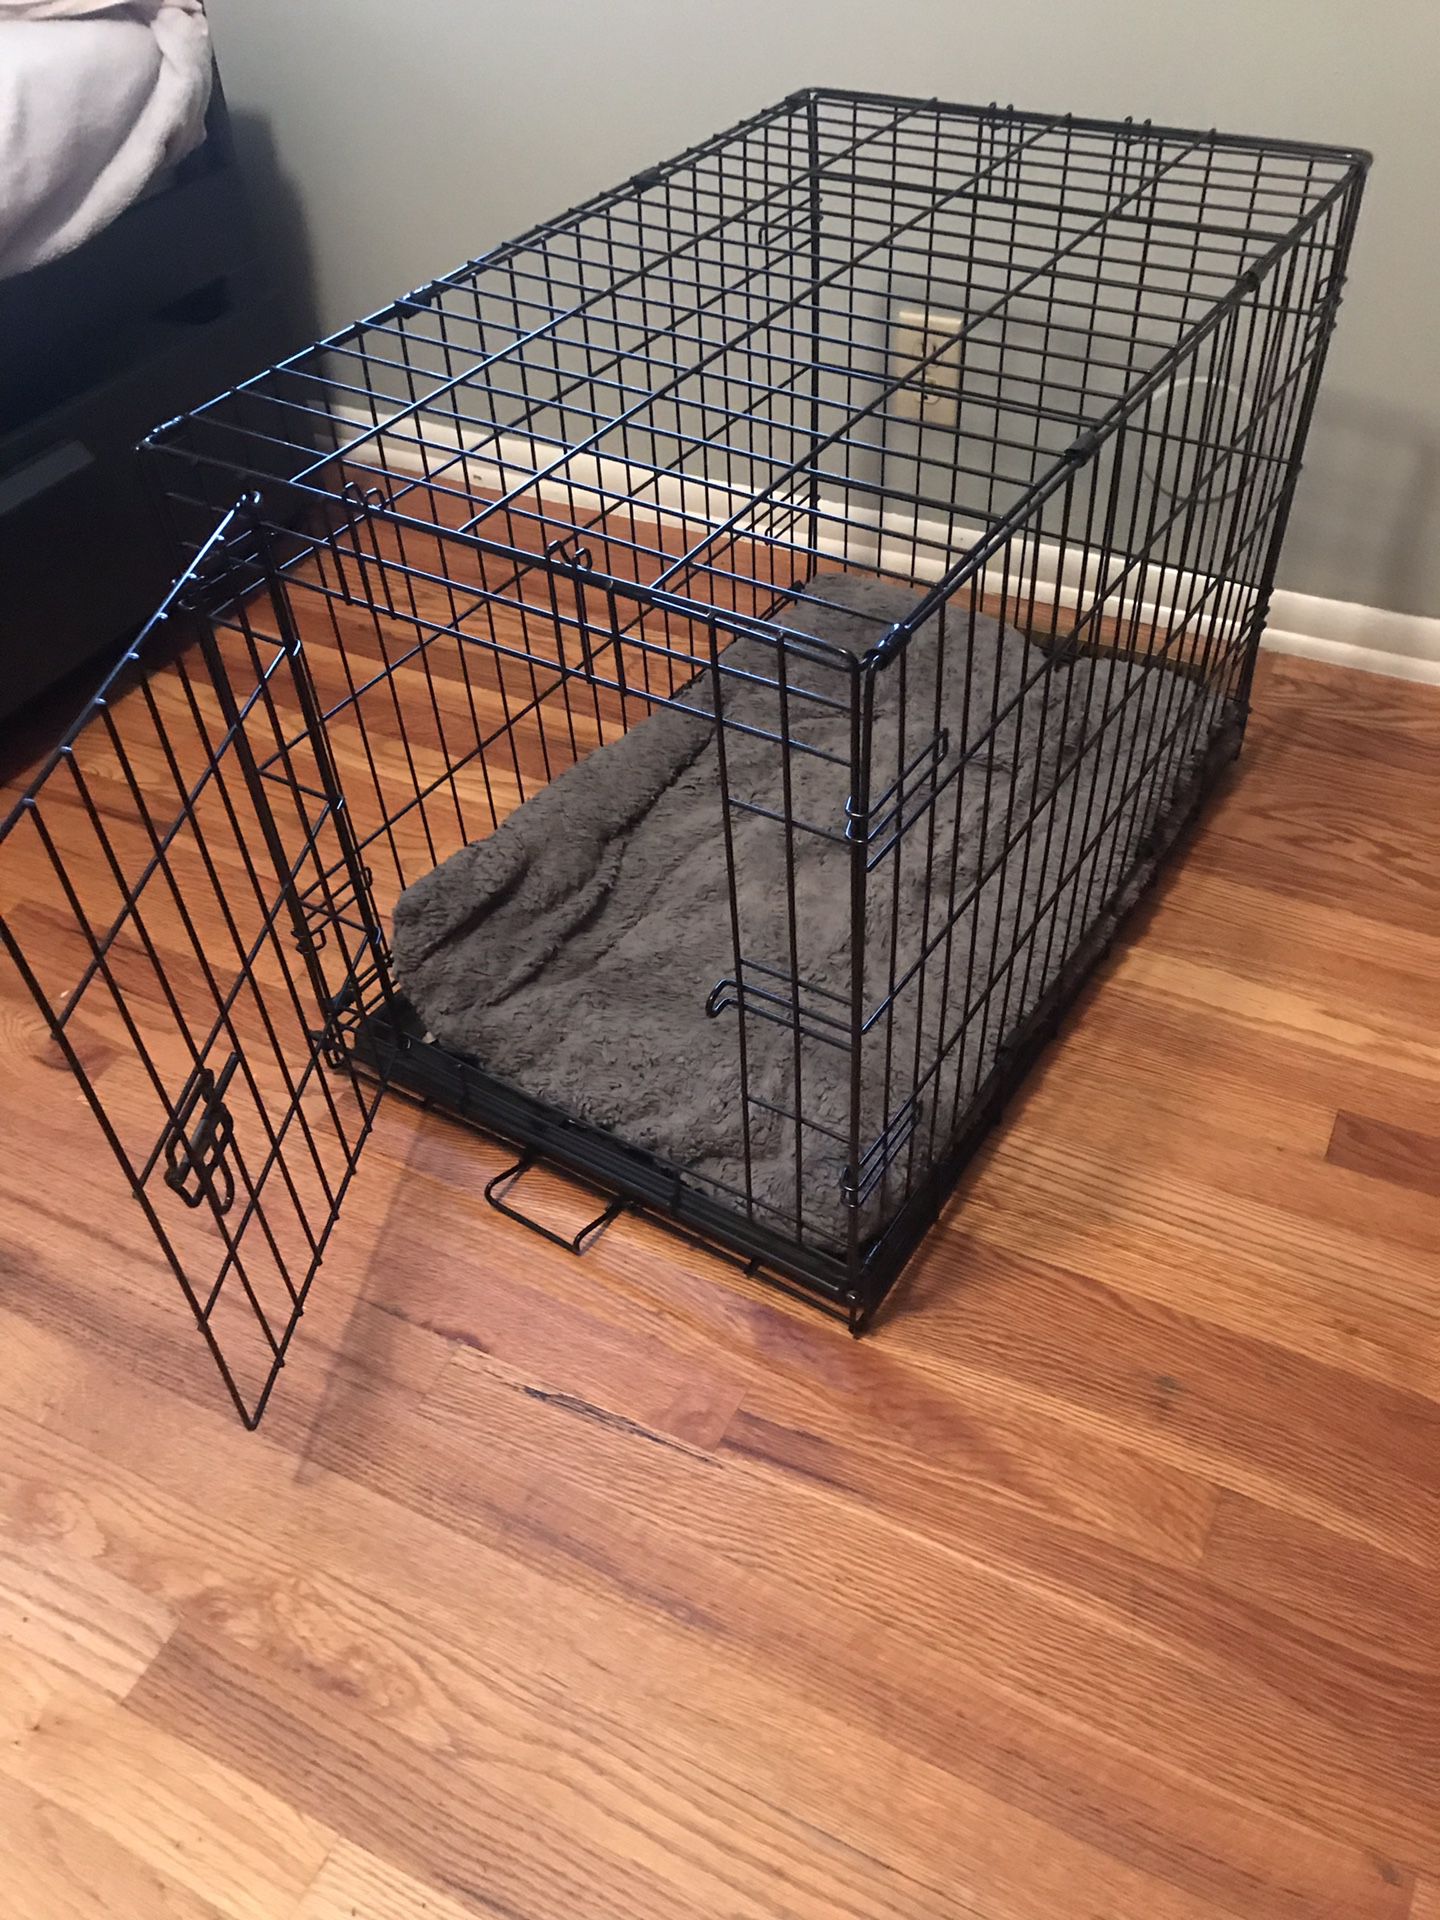 30” folding metal dog crate with cushion